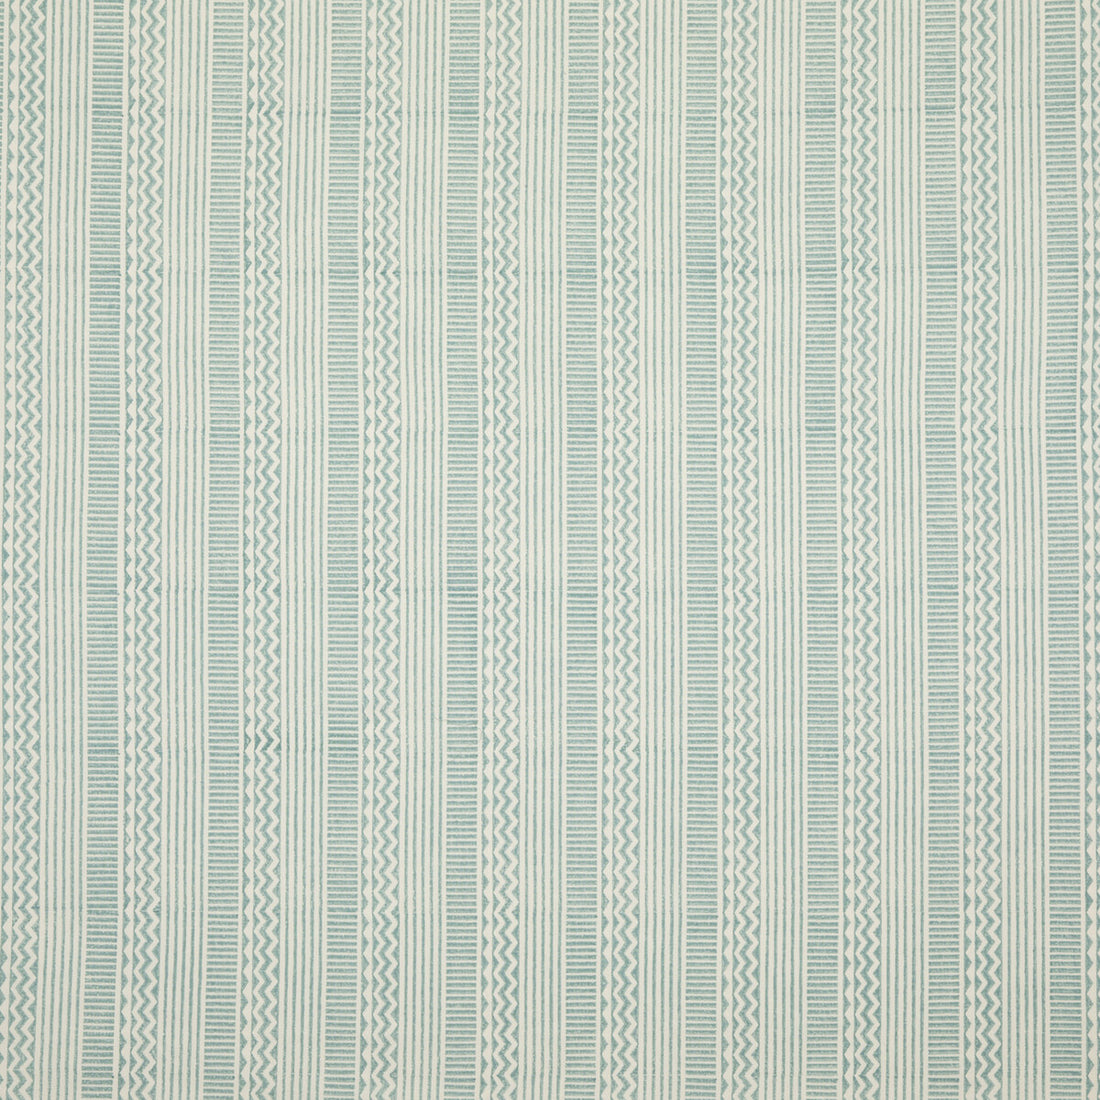 Tolosa fabric in aqua color - pattern PP50450.3.0 - by Baker Lifestyle in the Homes &amp; Gardens III collection